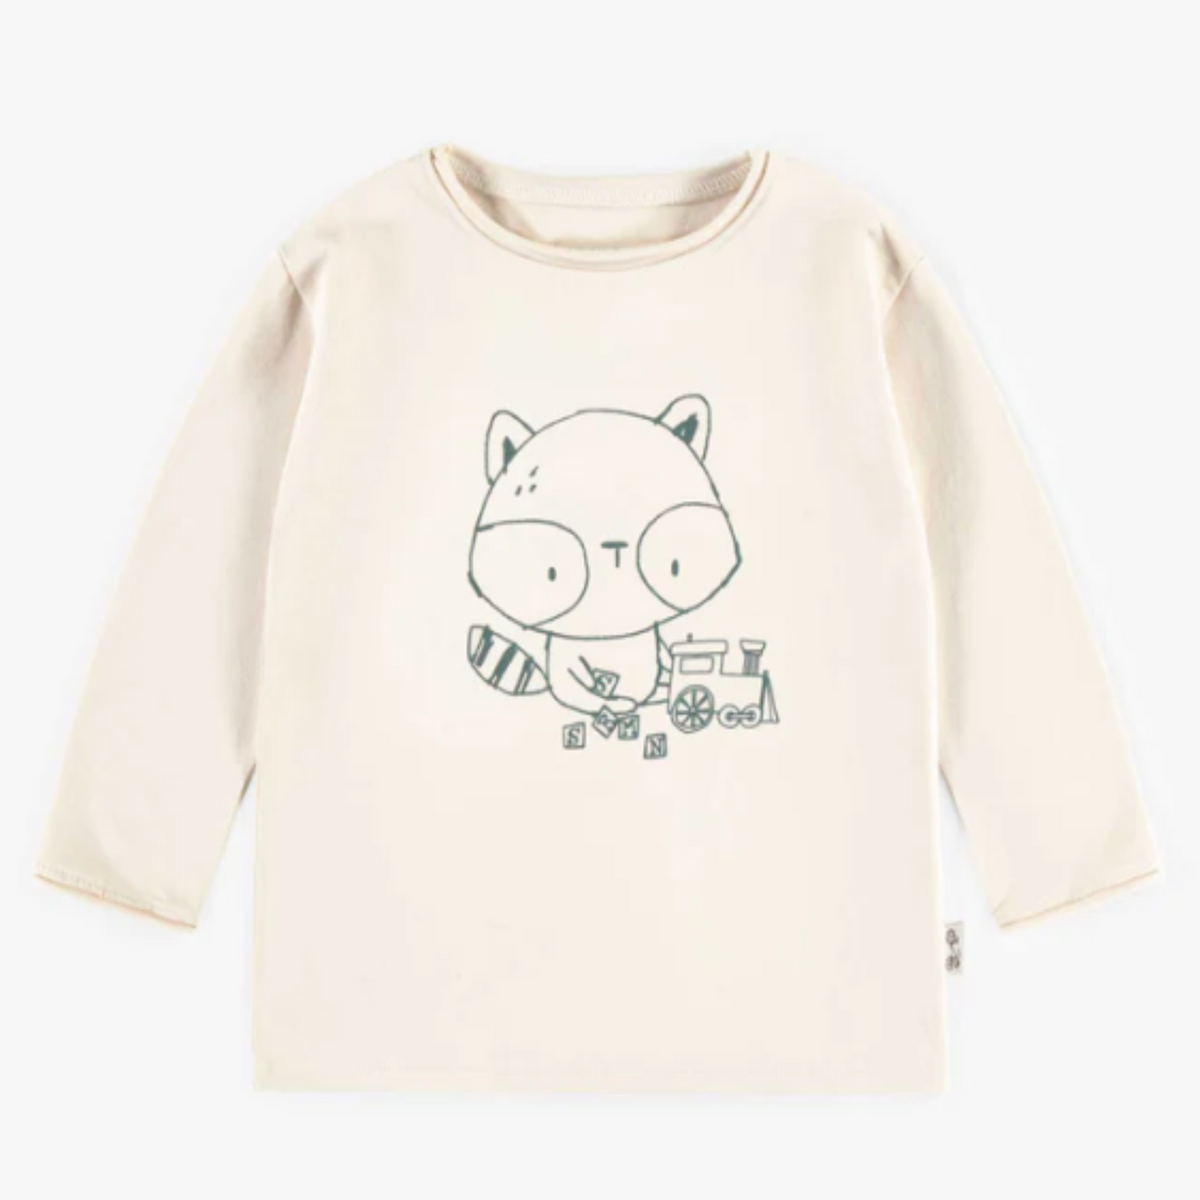 Cream long-sleeved t-shirt in stretch cotton, baby